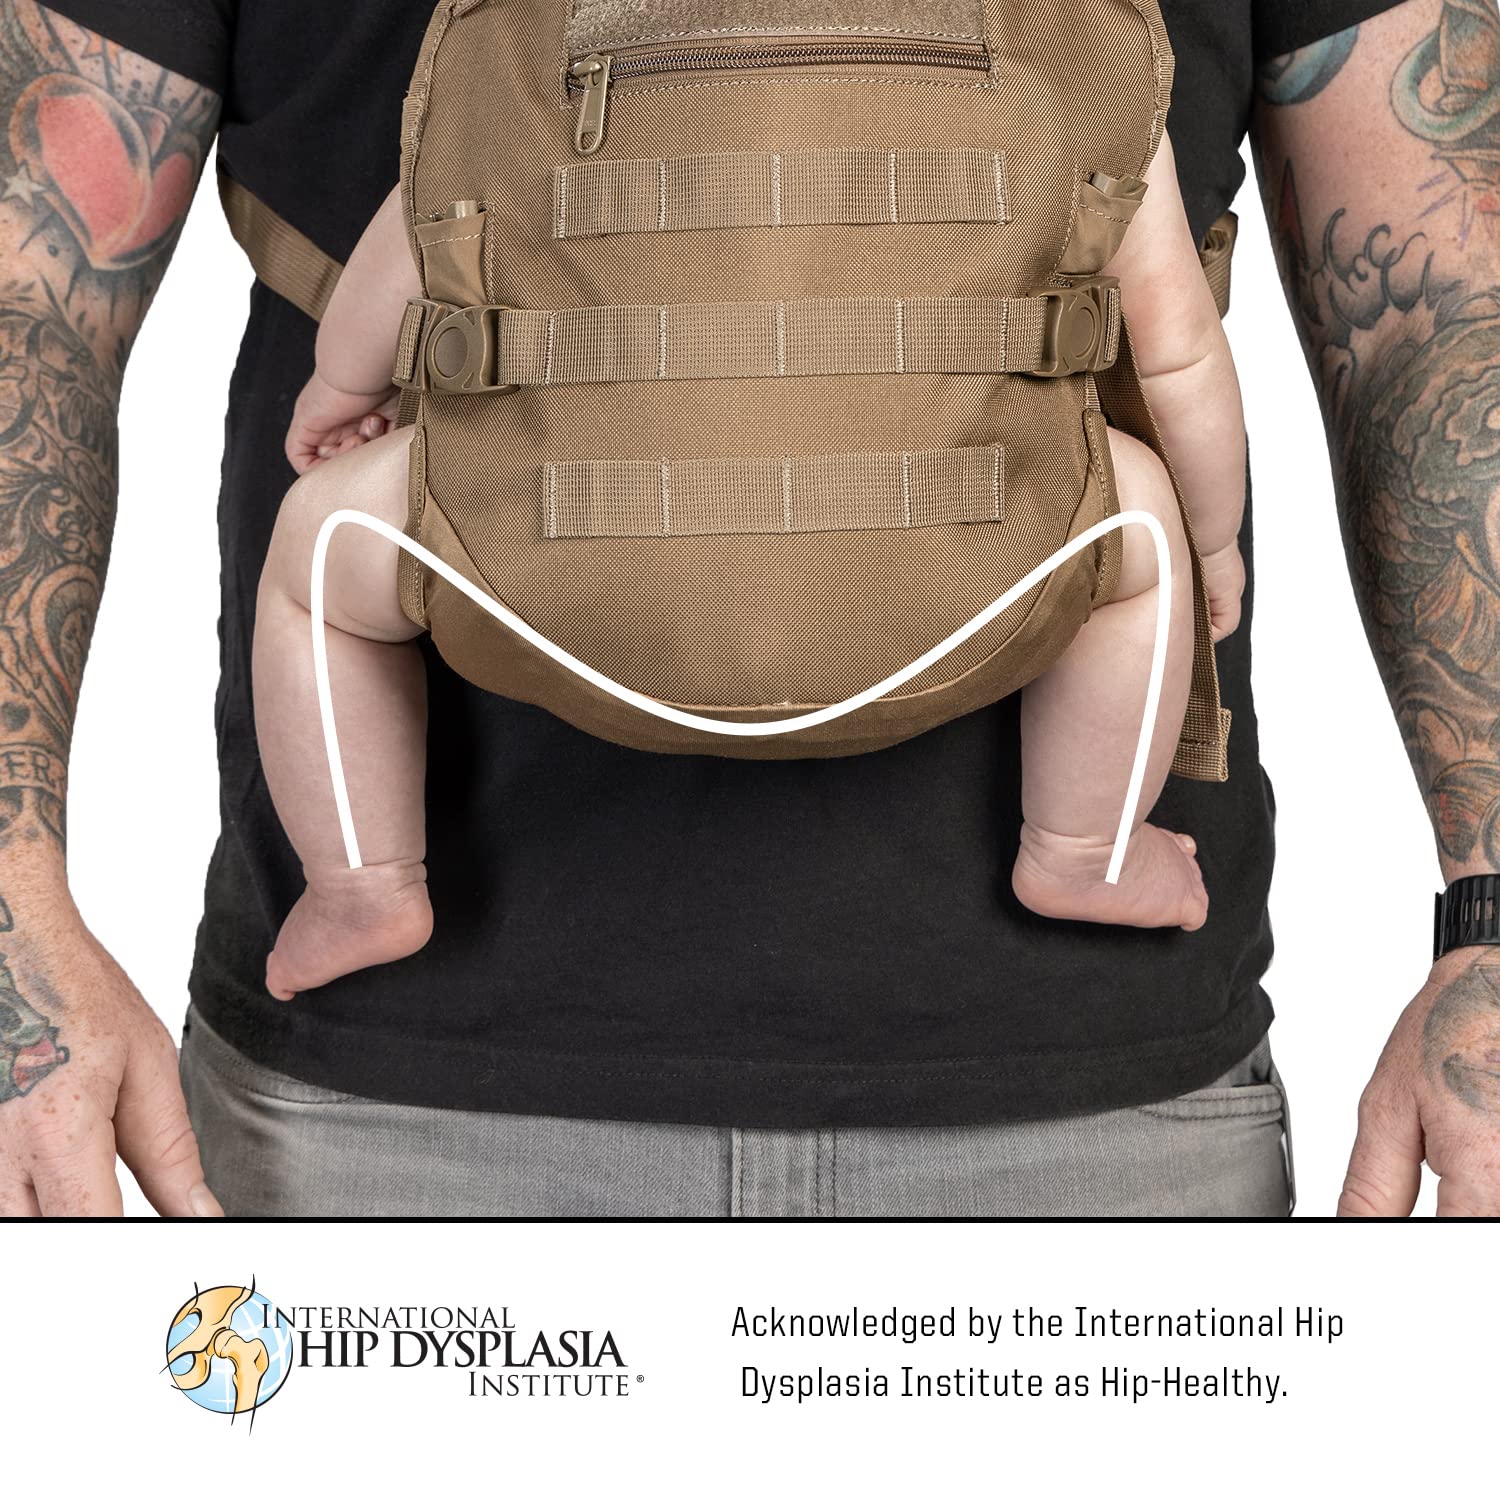 Mens Tactical Baby Carrier for Infants and Toddlers 8-33 lbs